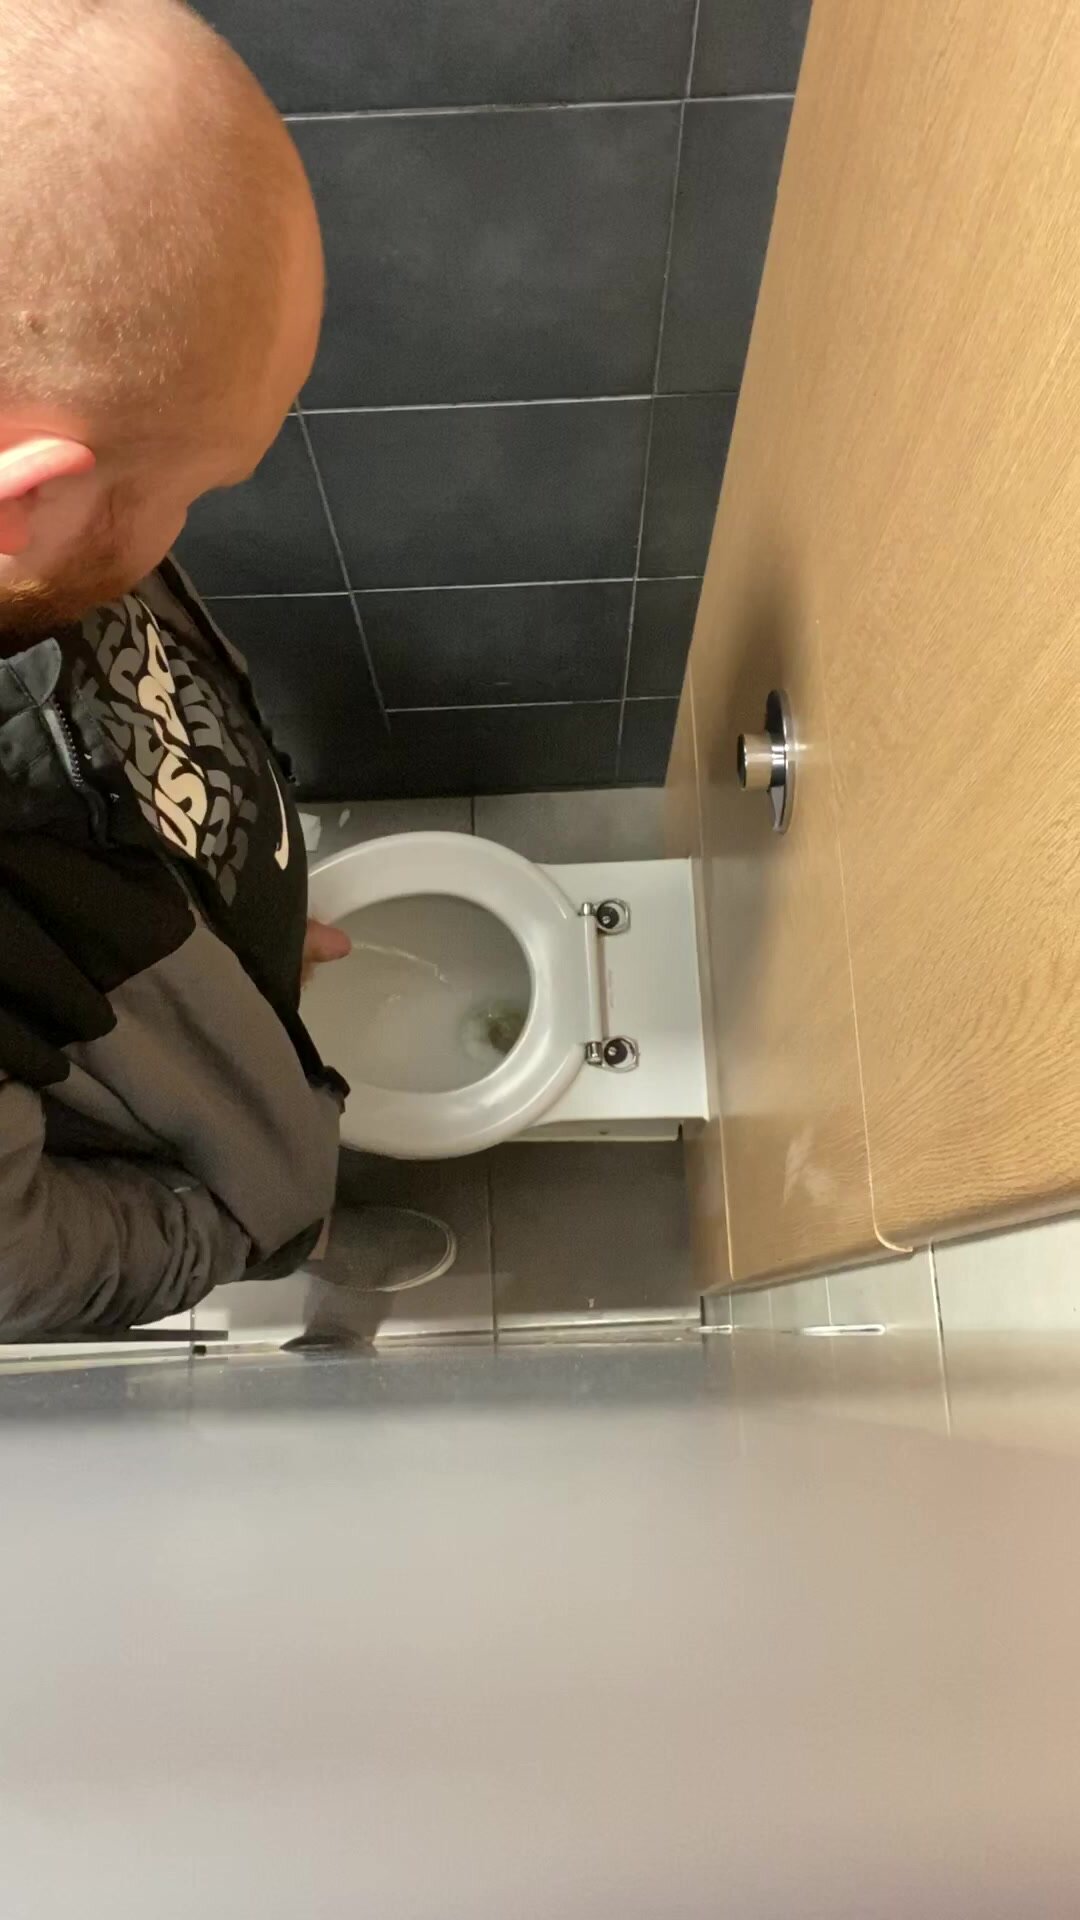 Spy on small uncut cock pissing